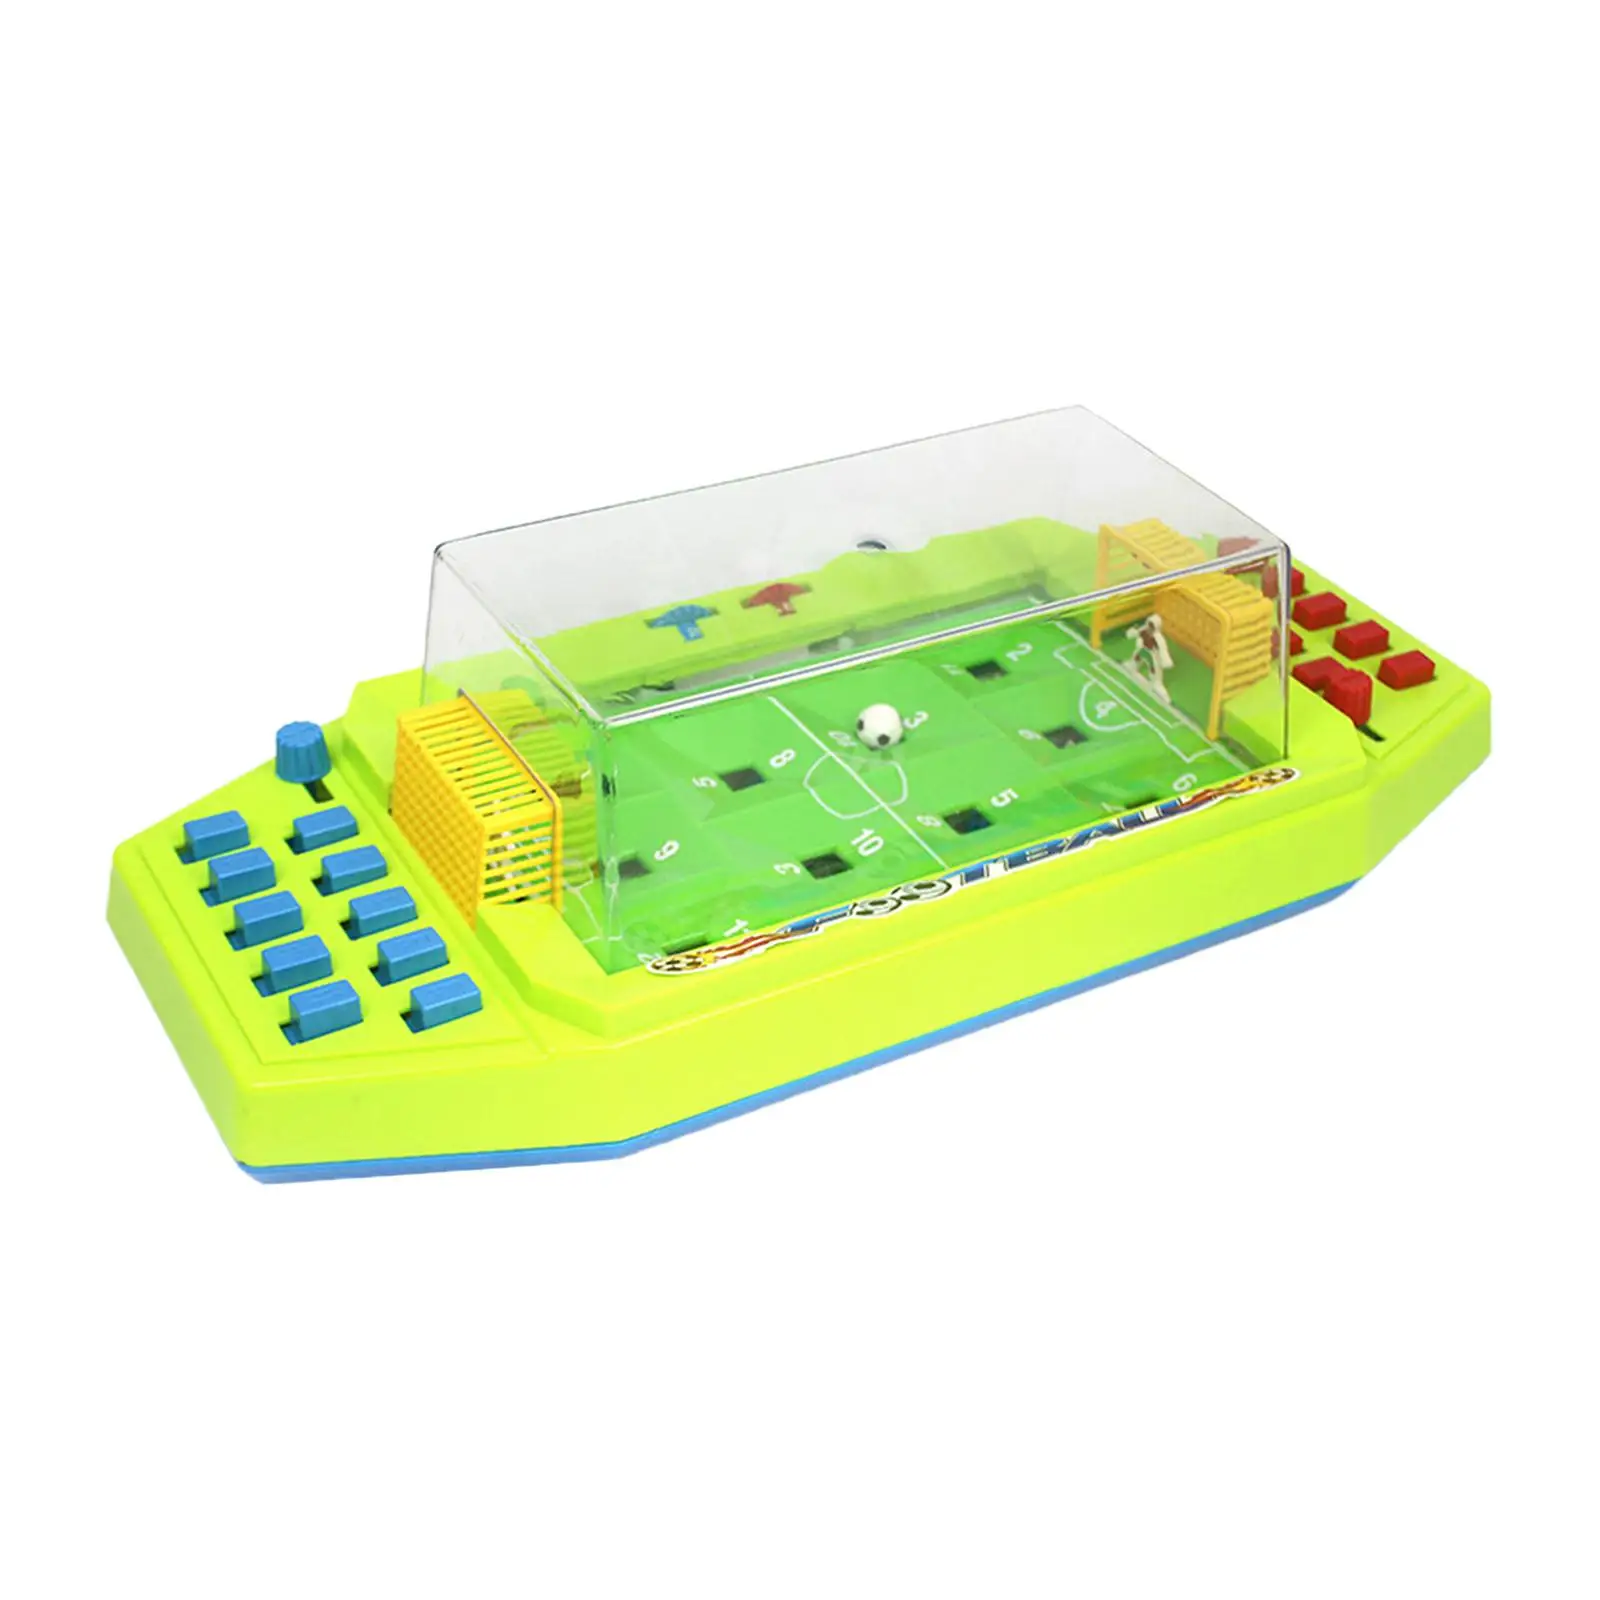 Soccer Tabletop Game with Scoreboard Interactive Table Soccer Game Two Players Kids Adults Parties Family Night Birthday Gift